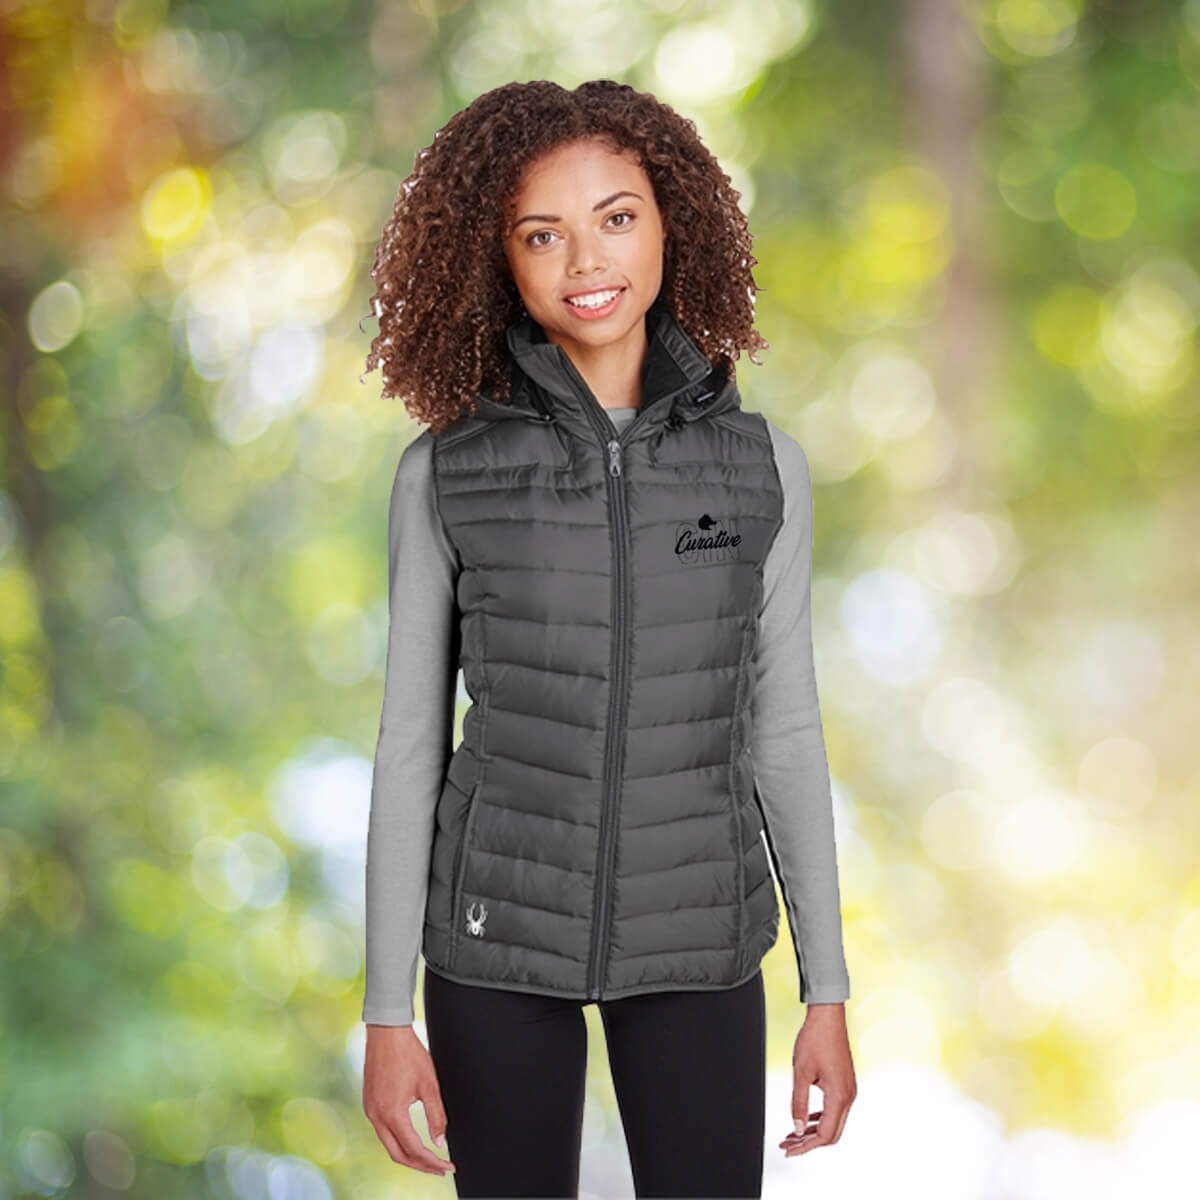 Woman outdoors wearing grey vest outerwear apparel with black curative printing logo imprint